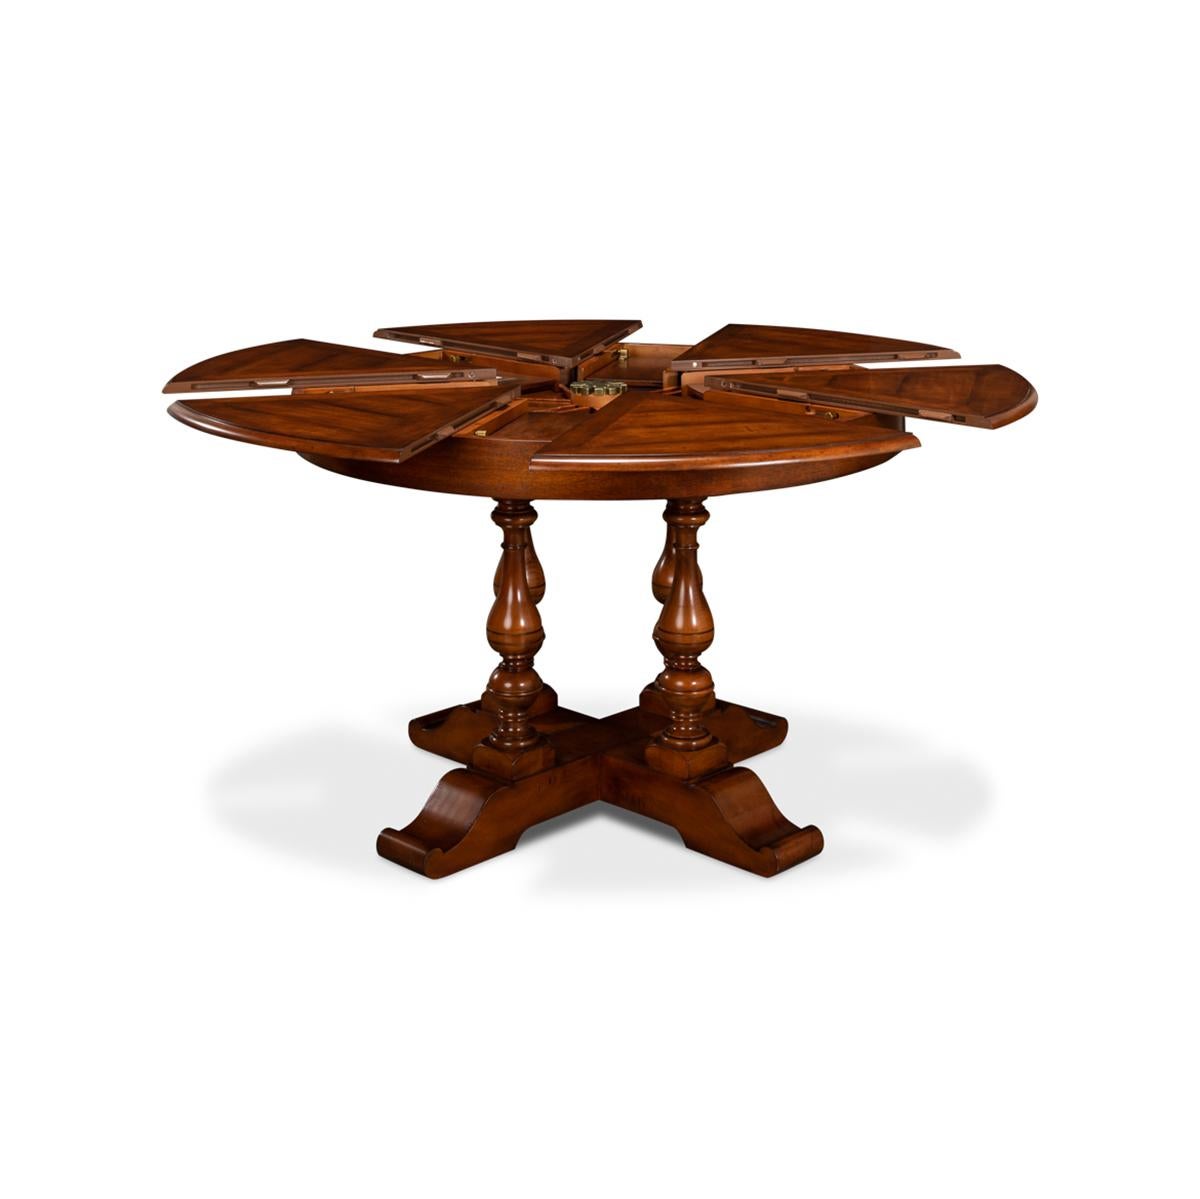 Early English style round extendable jupe dining table extending to 56 inches. Walnut table is veneered in finely figured walnut segments and supported on four solid vase-shaped turned legs leading to the X form base.

The table extends from 45 to